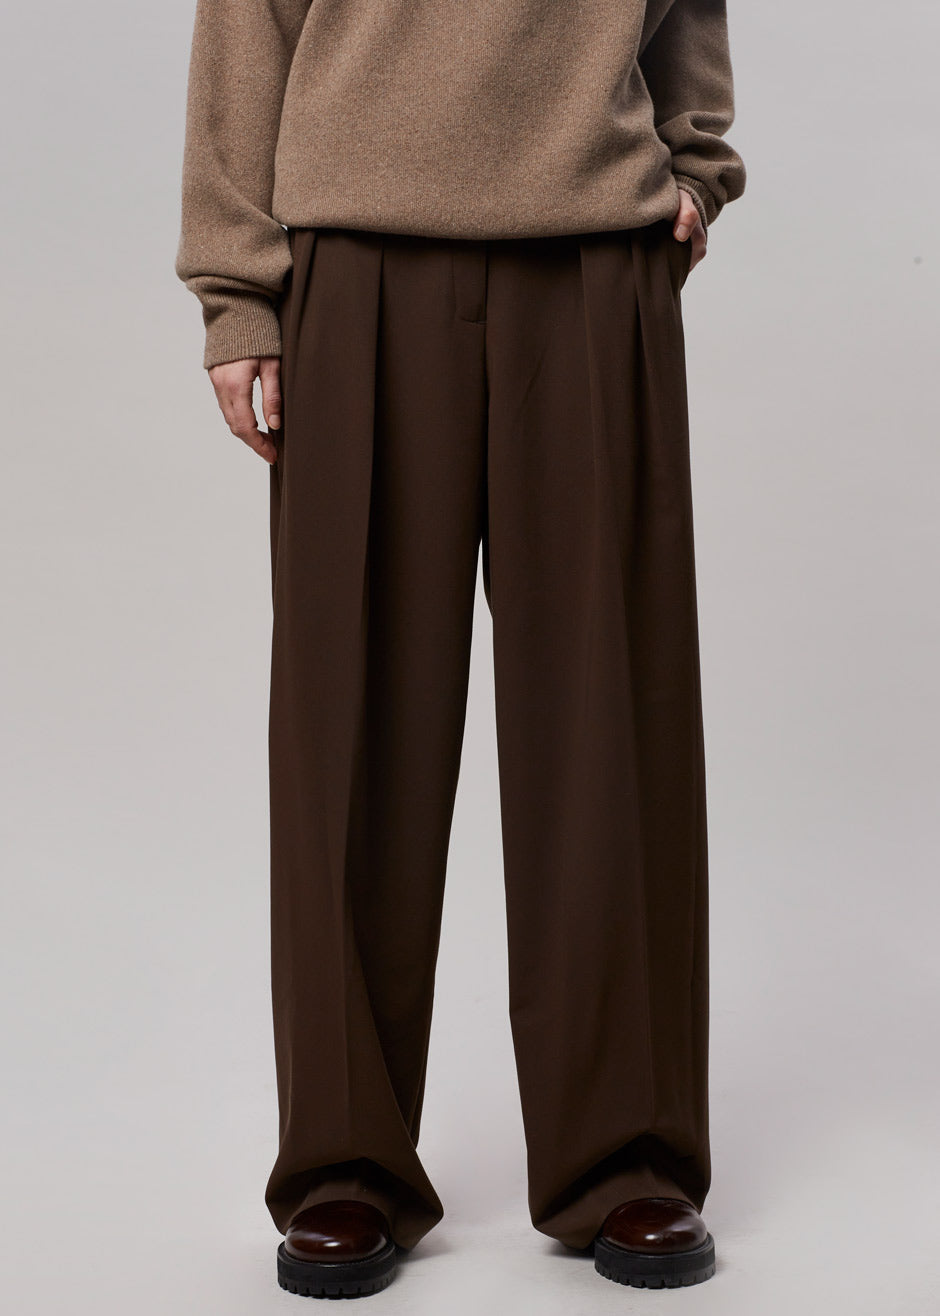 Tansy Pleated Trousers - Chocolate - 7